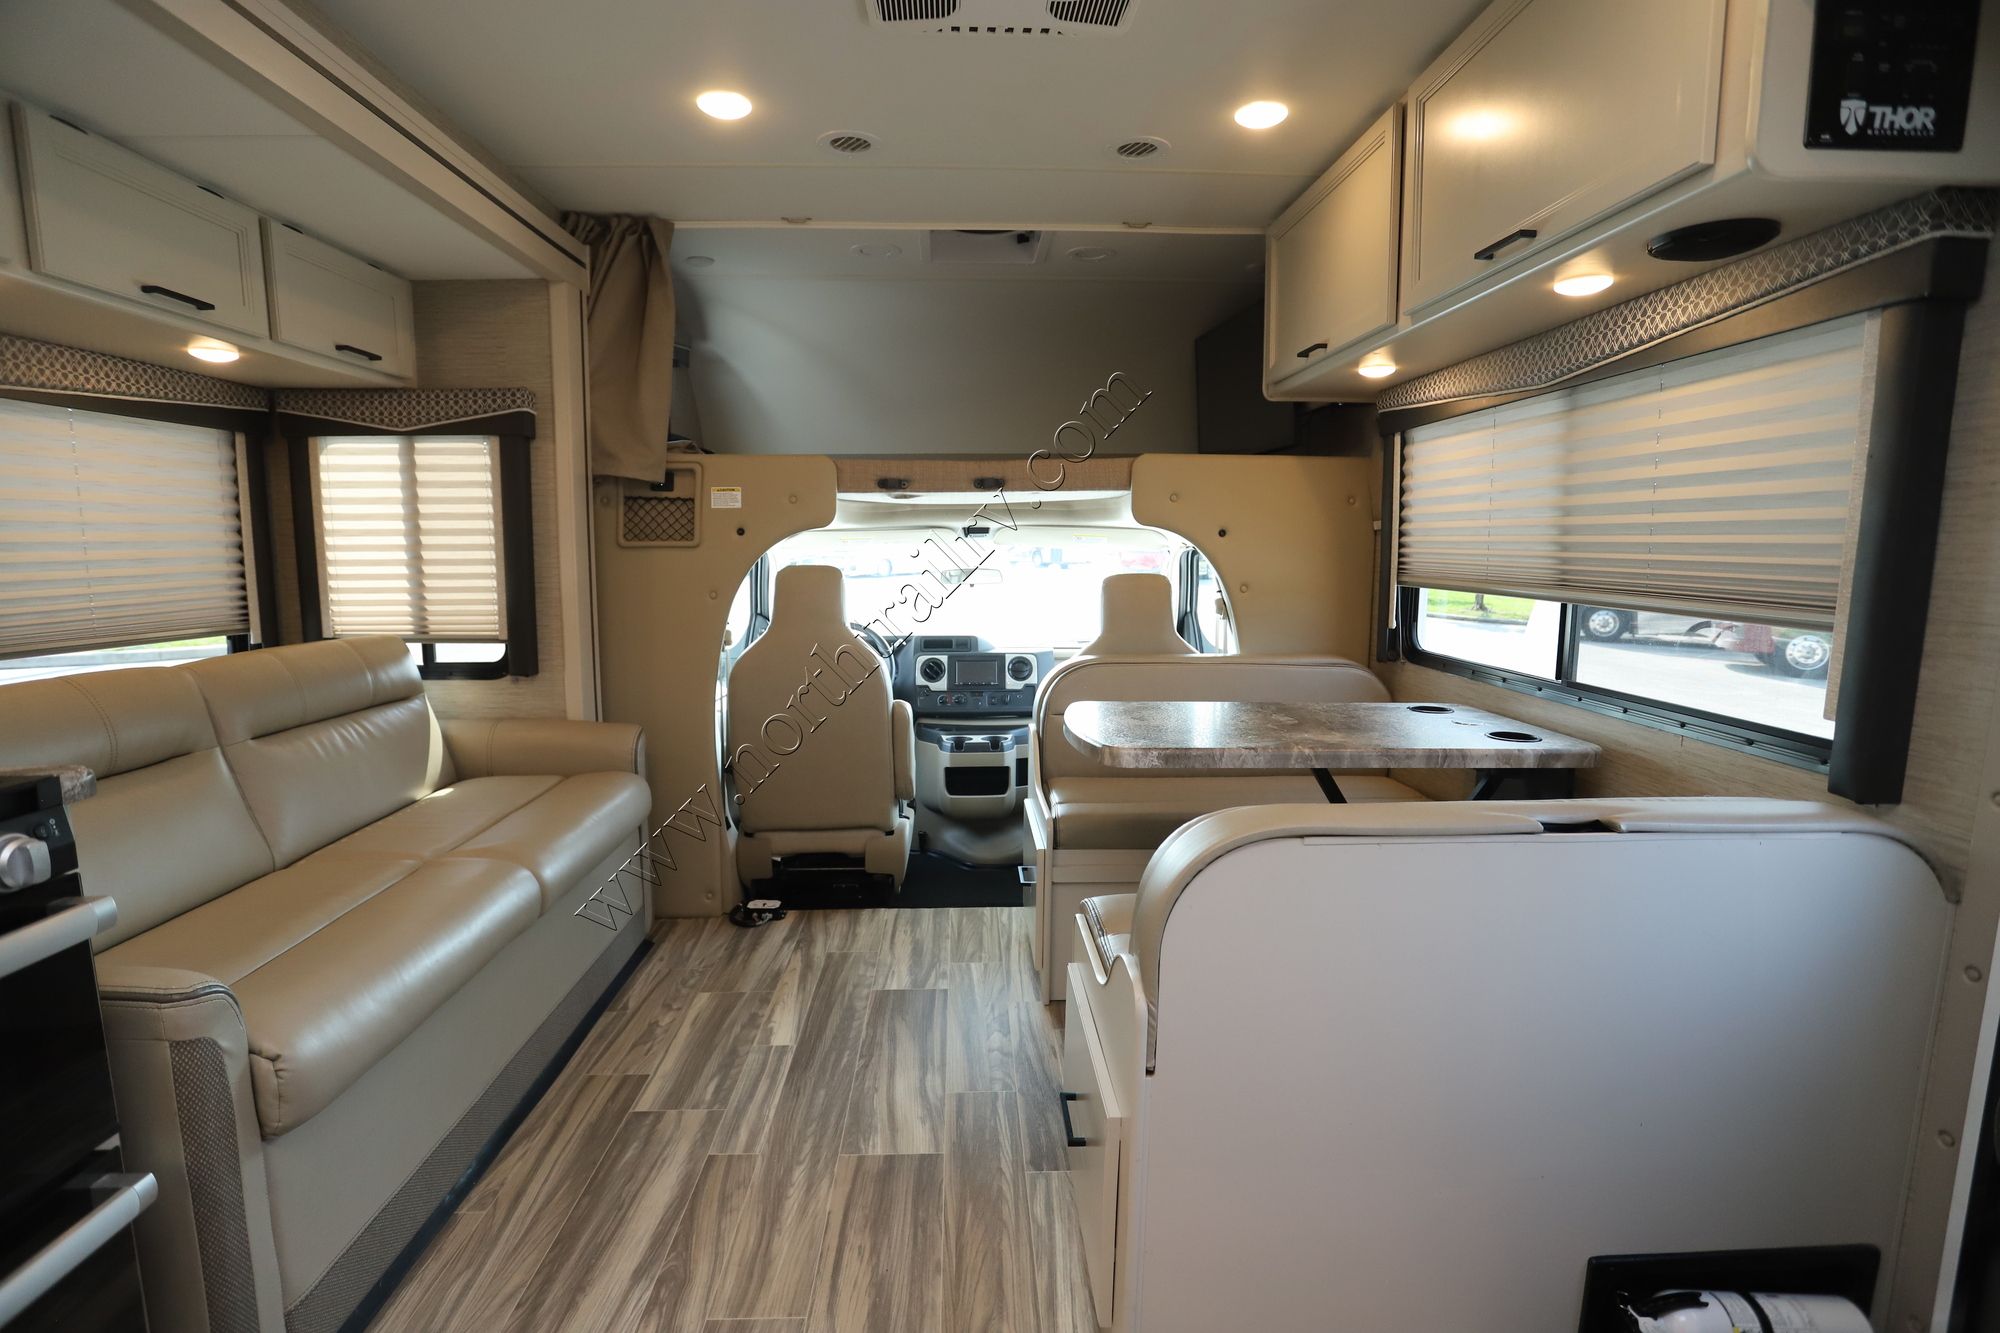 Used 2023 Thor Fourwinds 27R Class C  For Sale